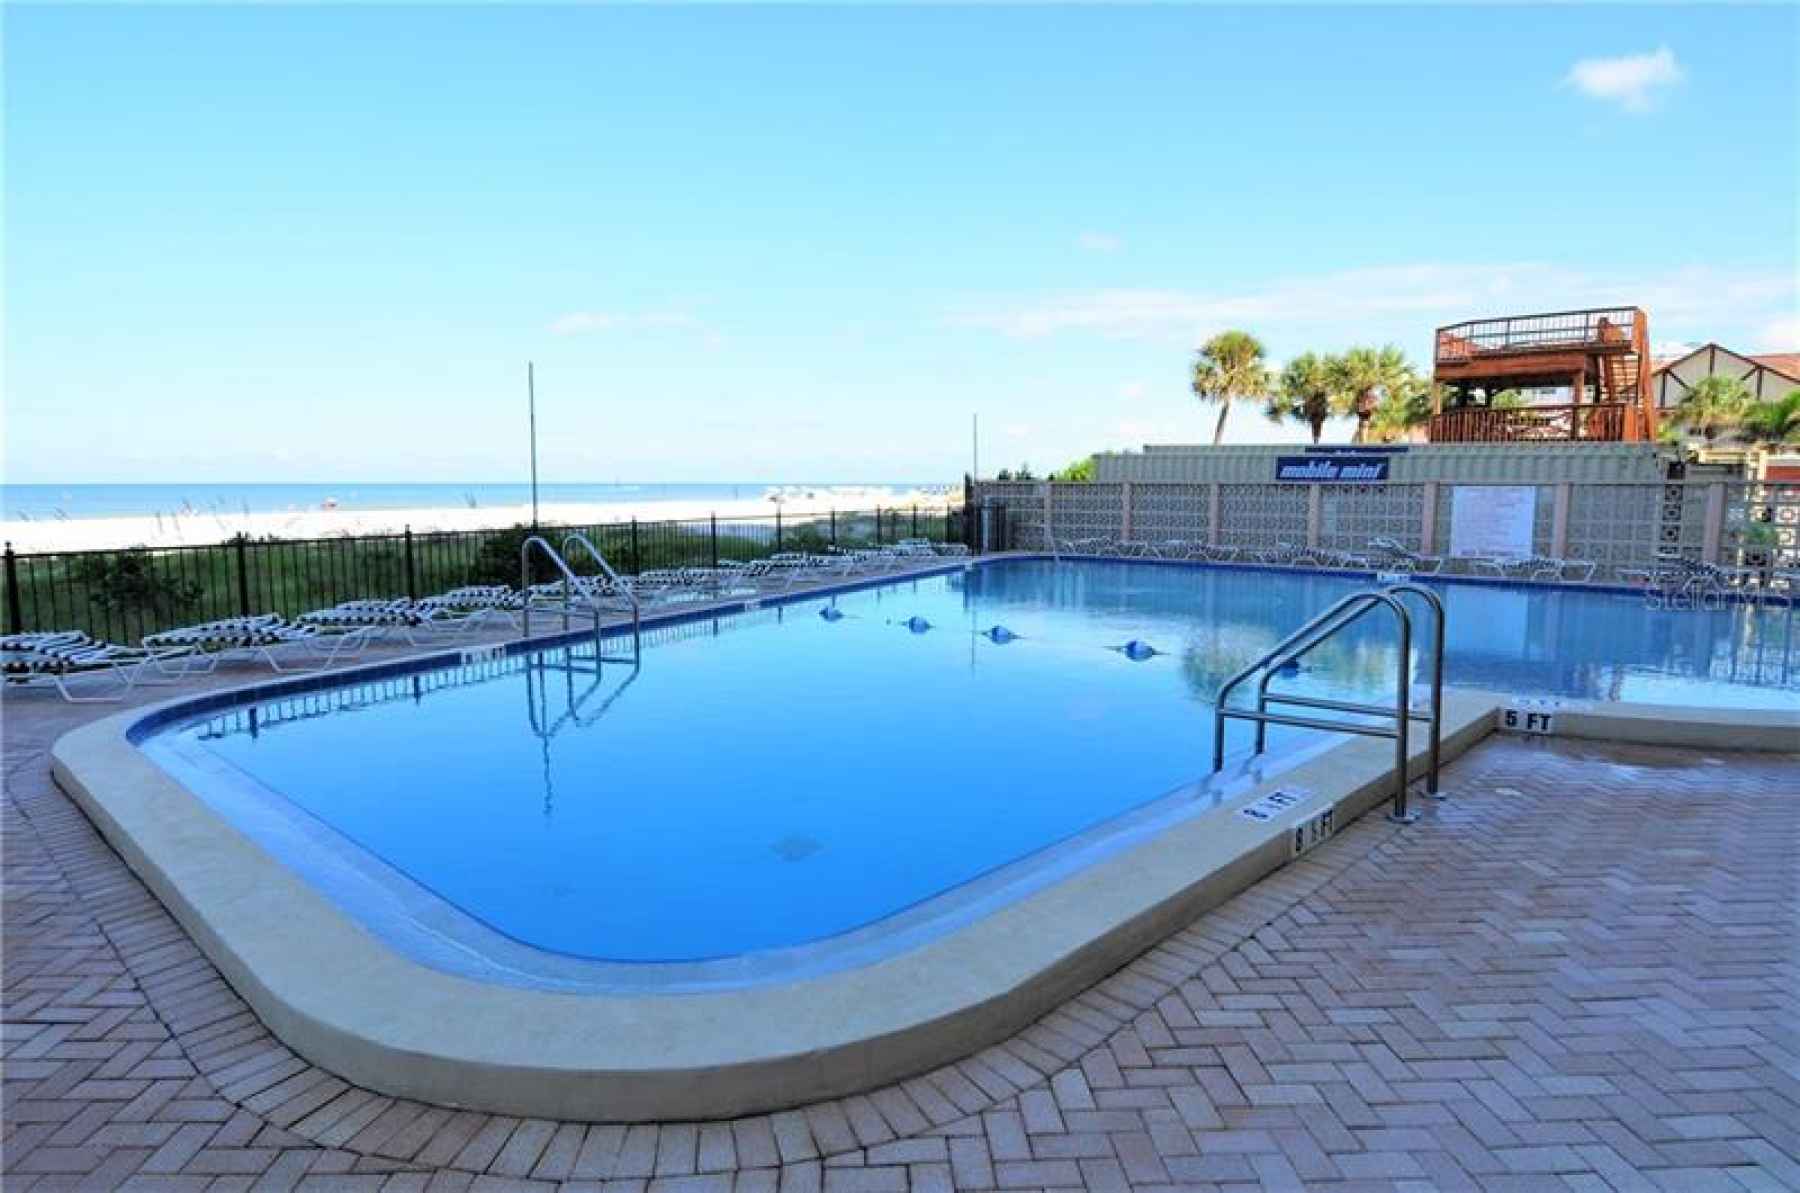 Salt water pool with plenty of surrounding space for relaxing and sun.